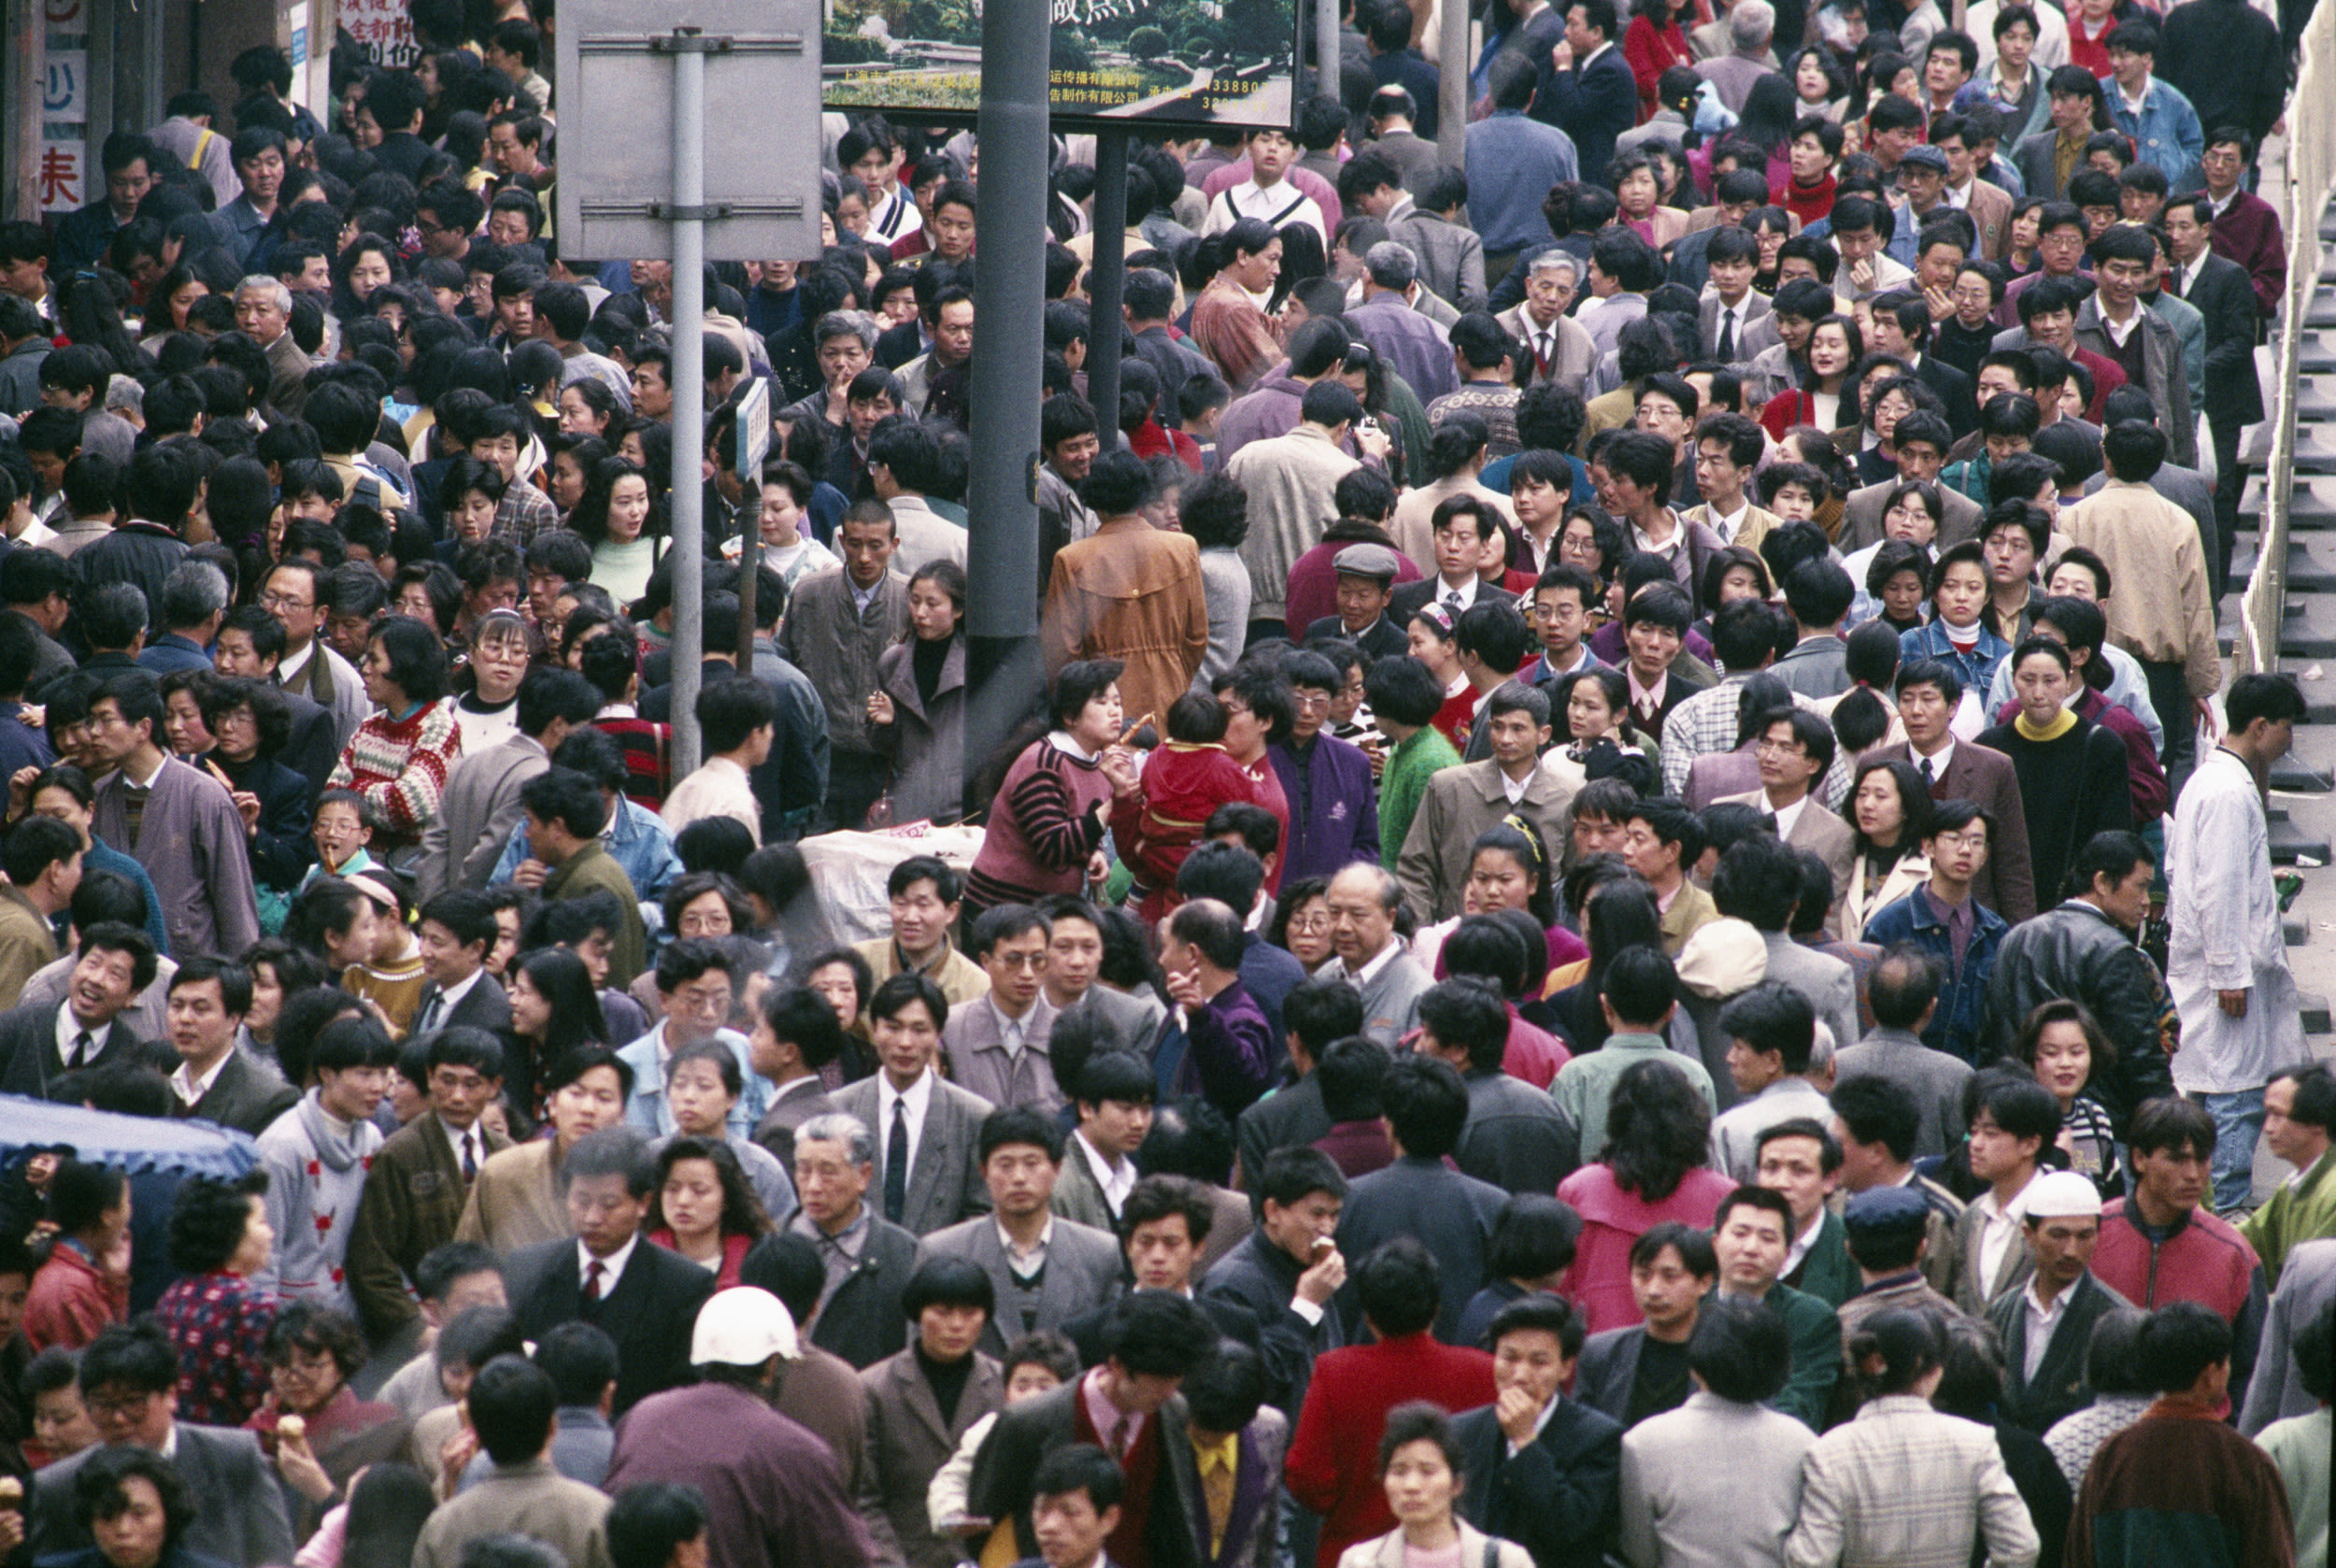 China is hiding a population secret, analyst says